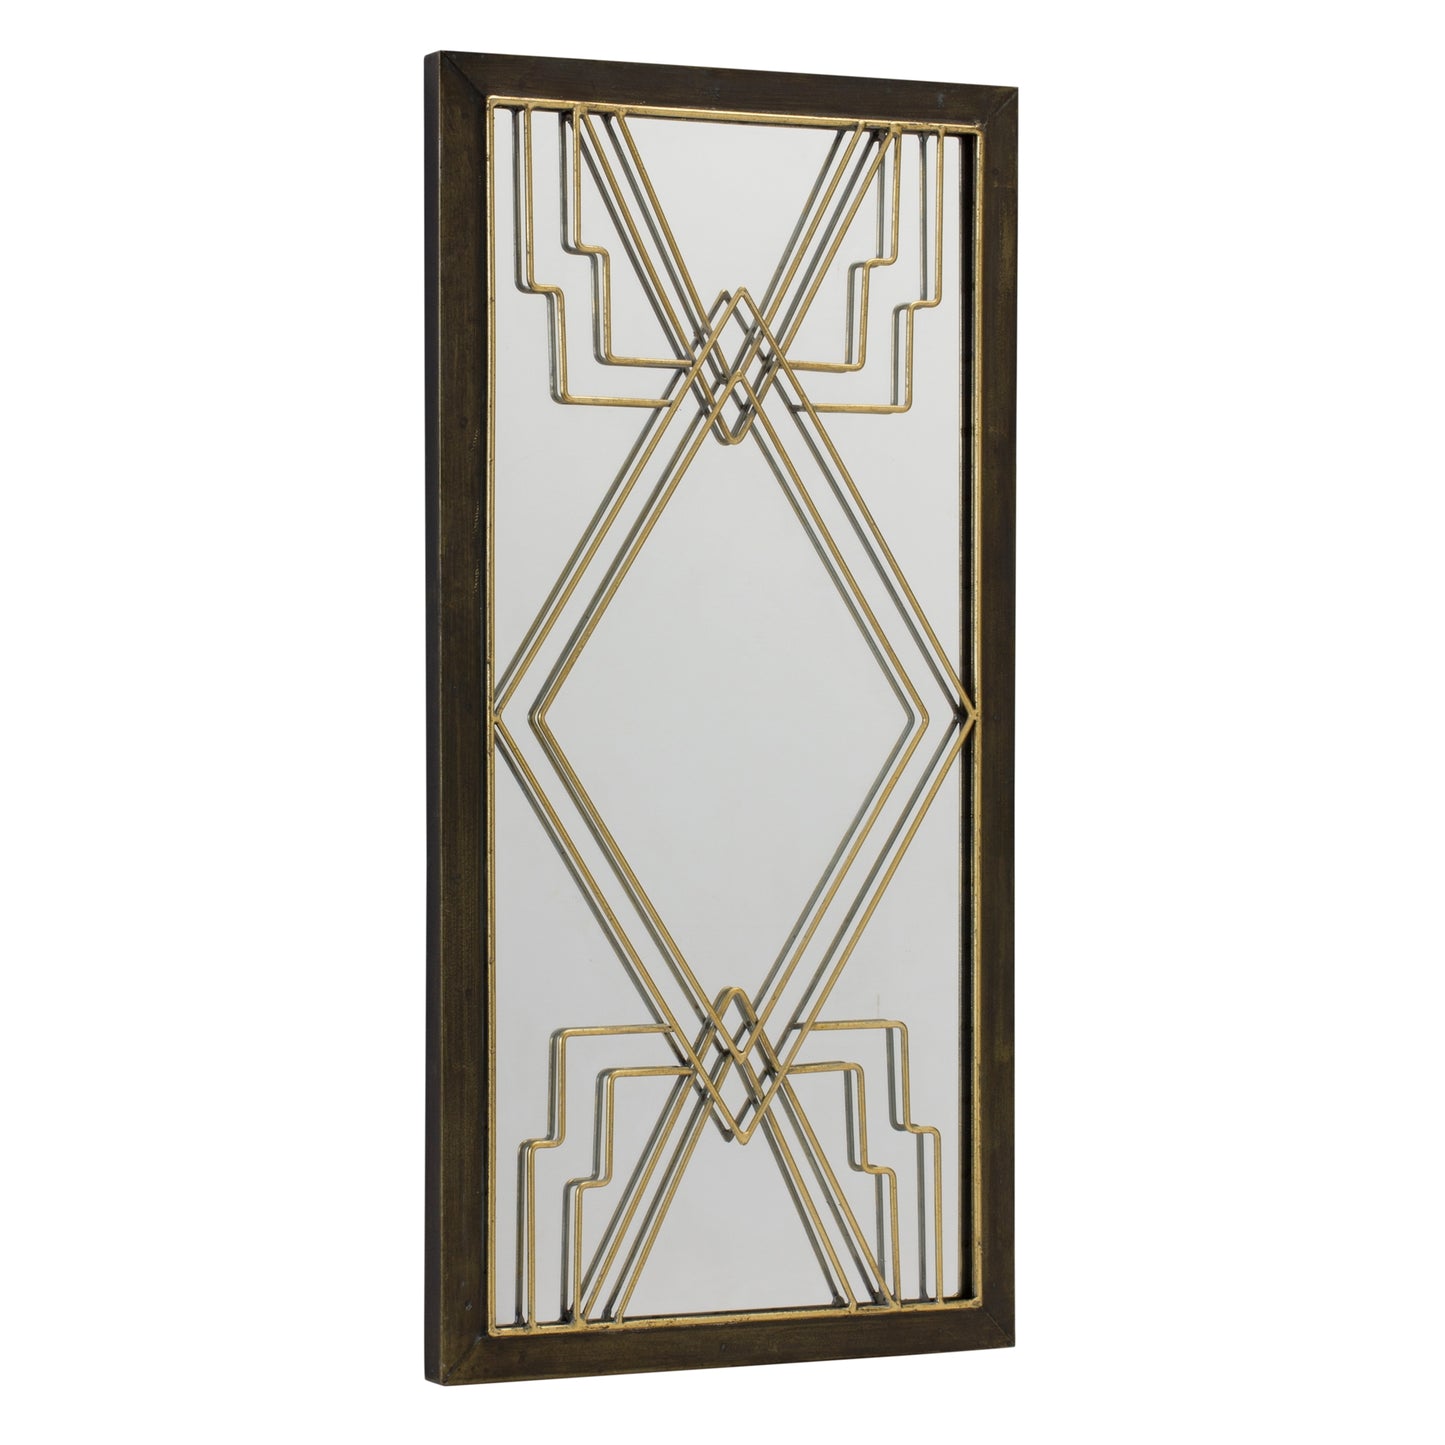 Metal Wall Mirror with Art Deco Design 23.75"H